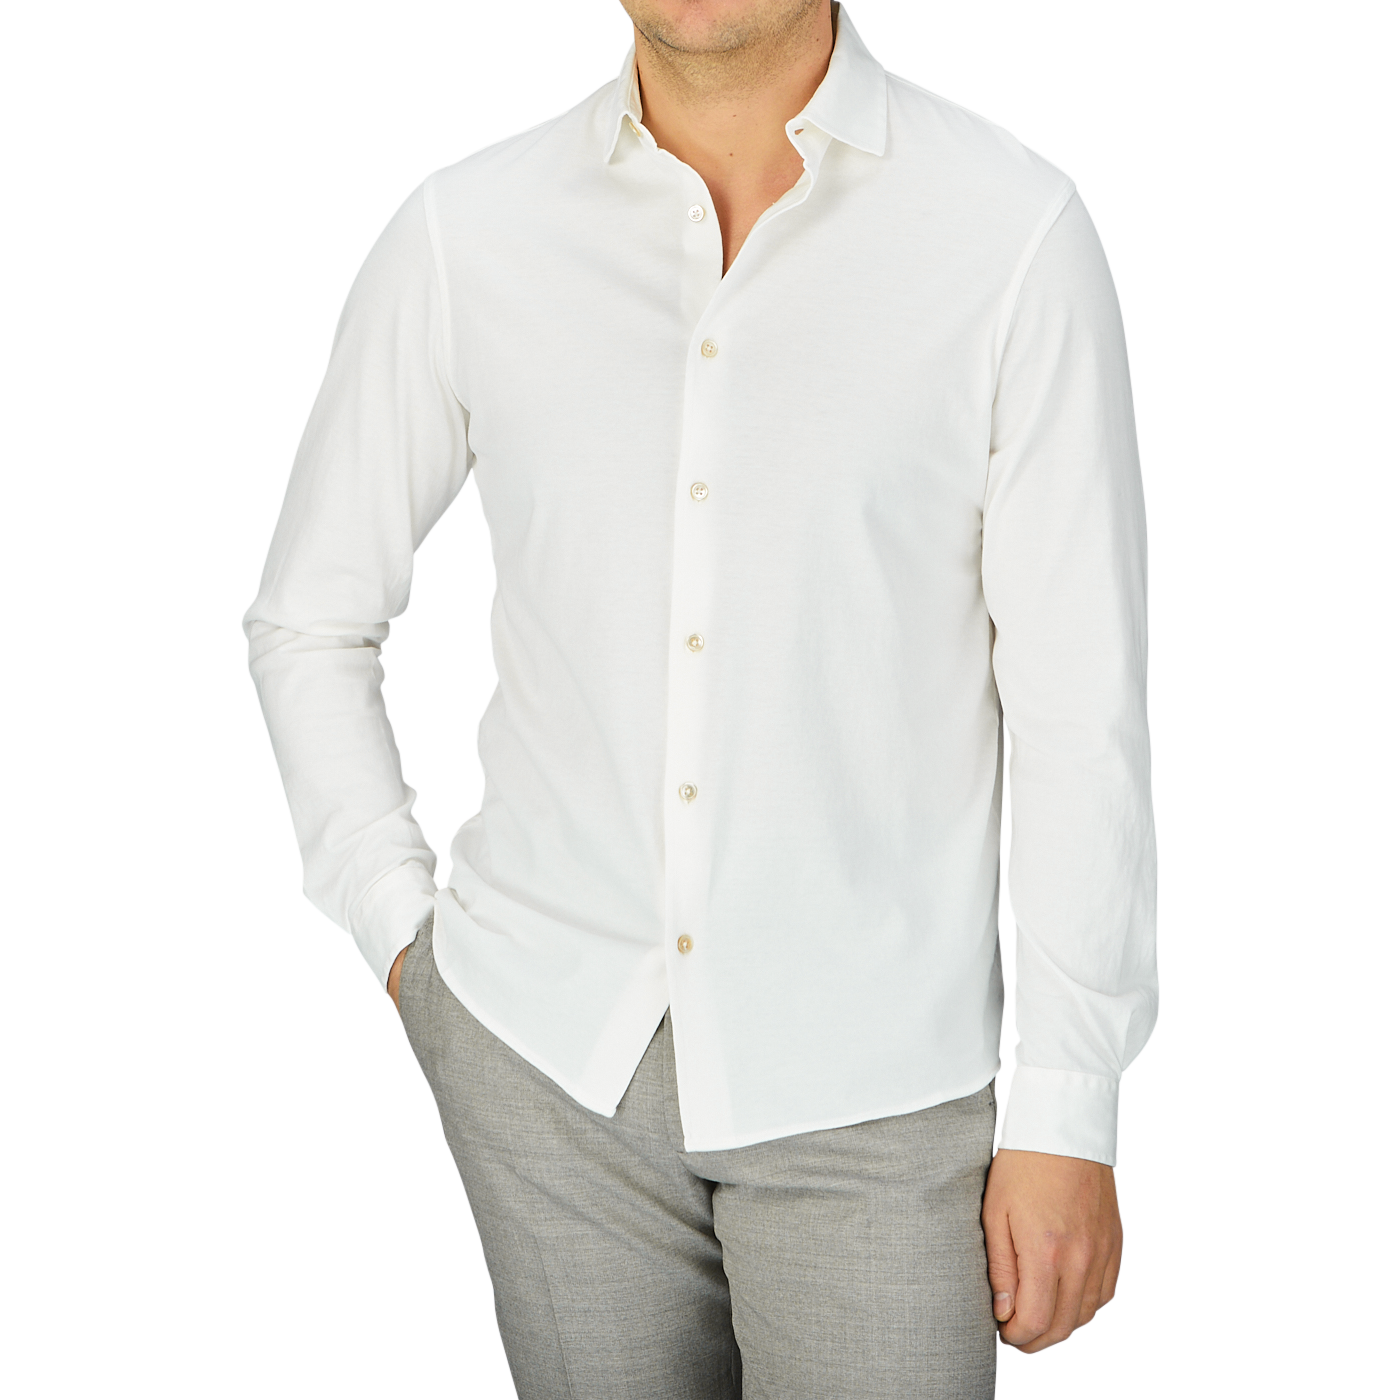 A man wearing a Off White Cotton Jersey Knitted Shirt by Filippo de Laurentiis and grey pants.